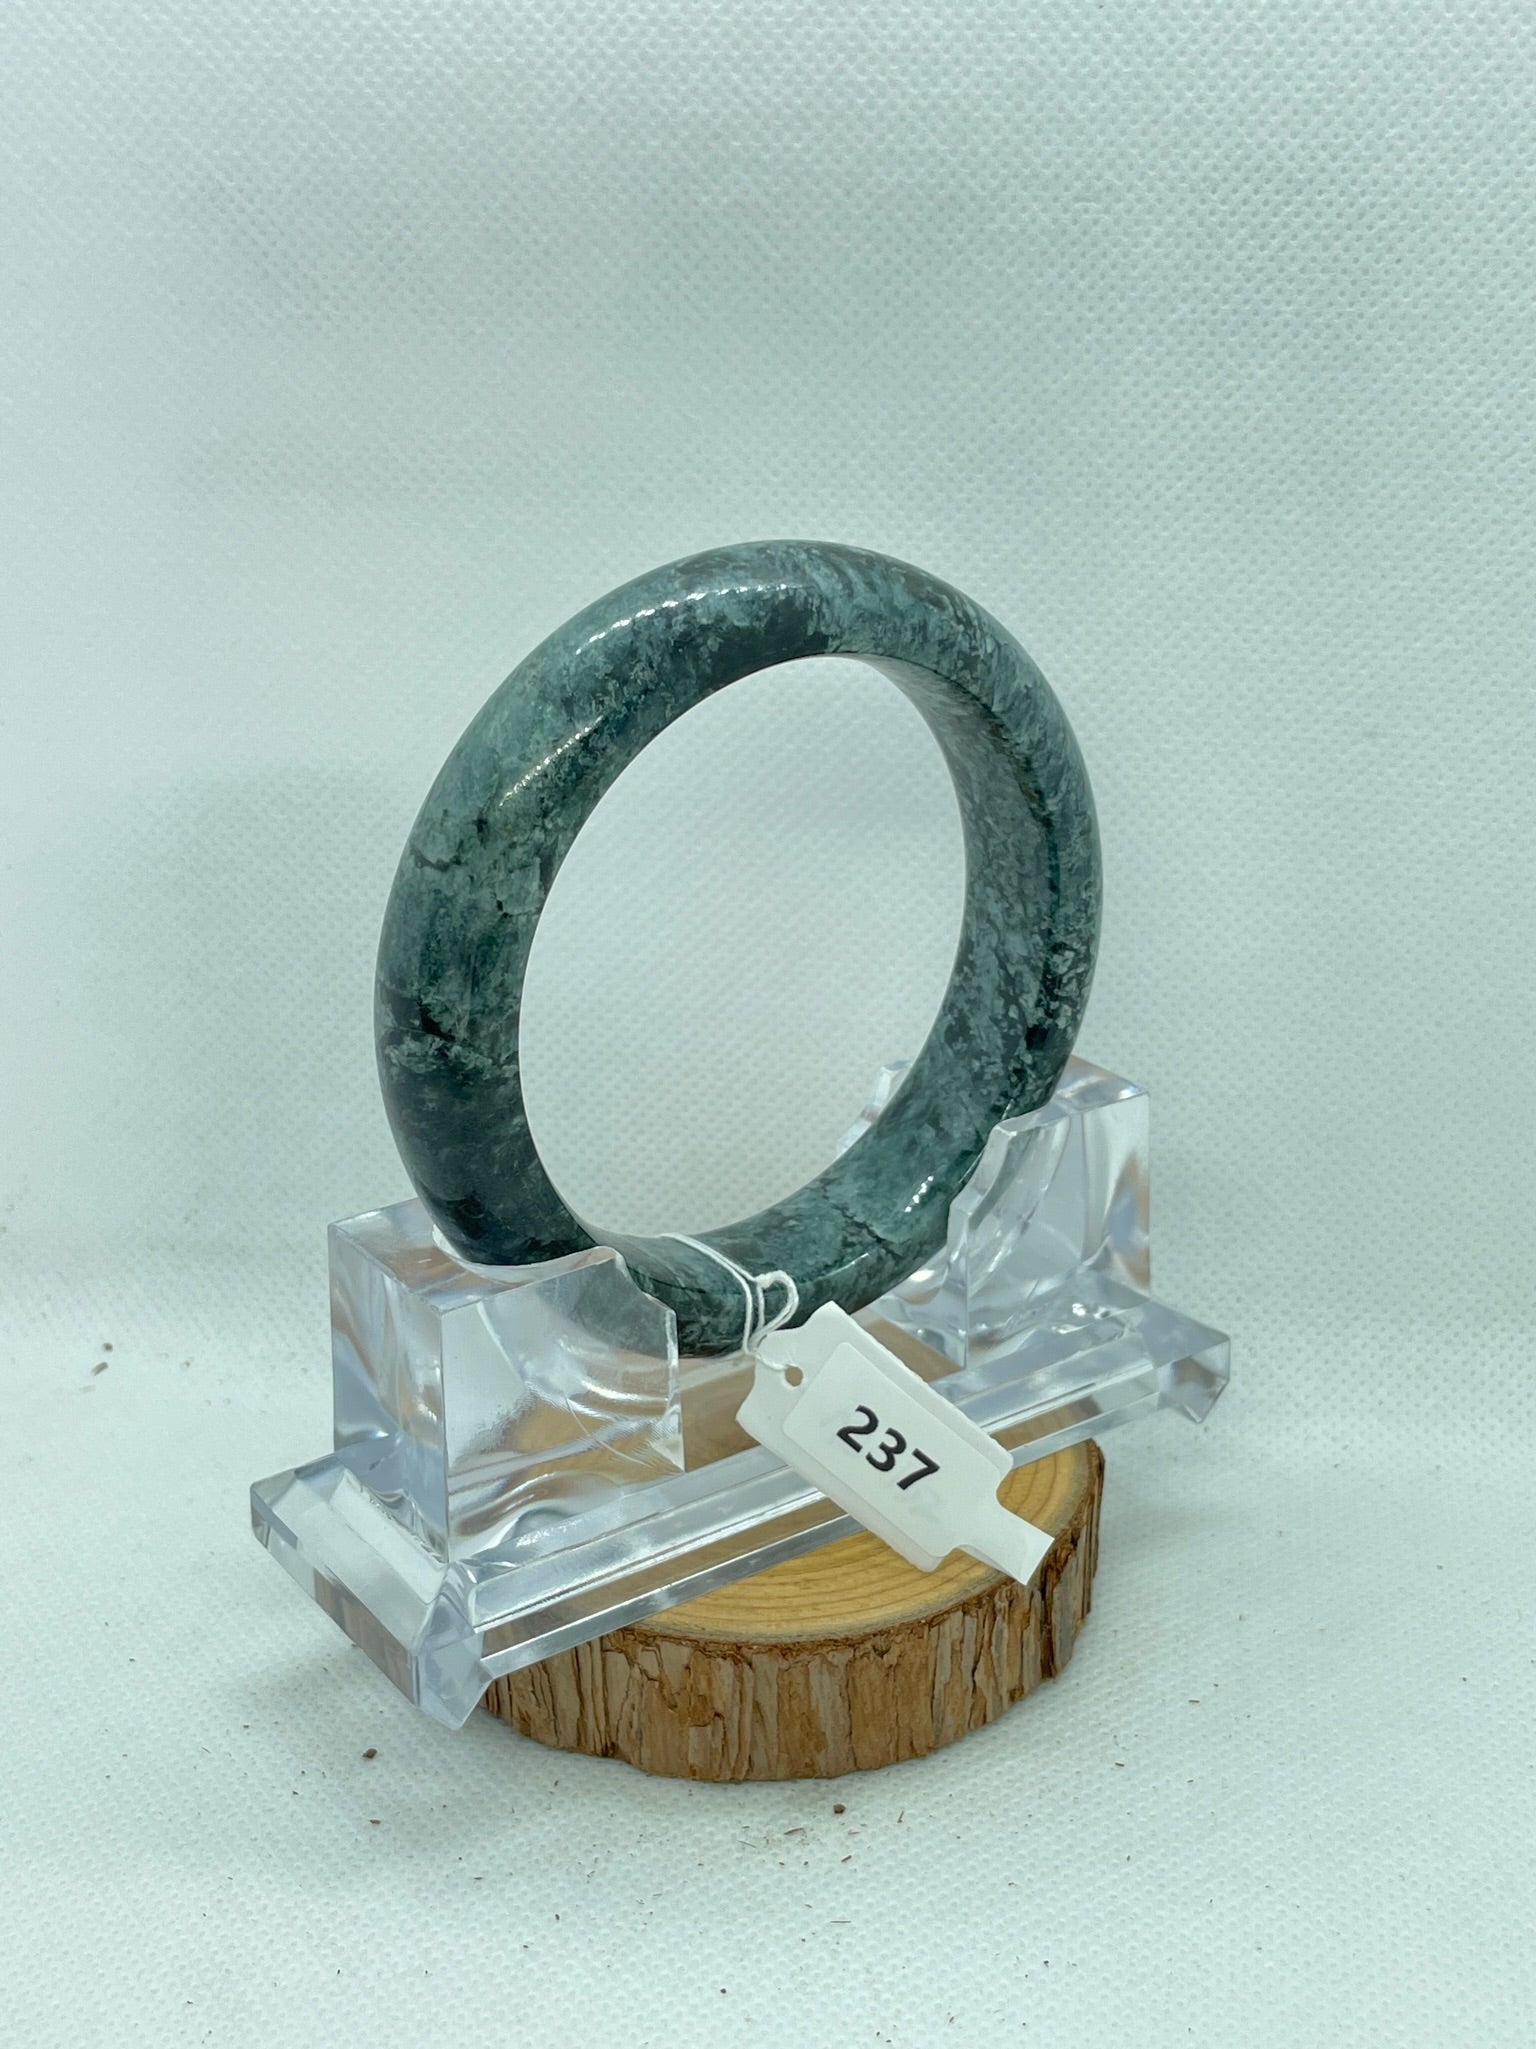 Grade A Natural Jade Bangle with certificate #237